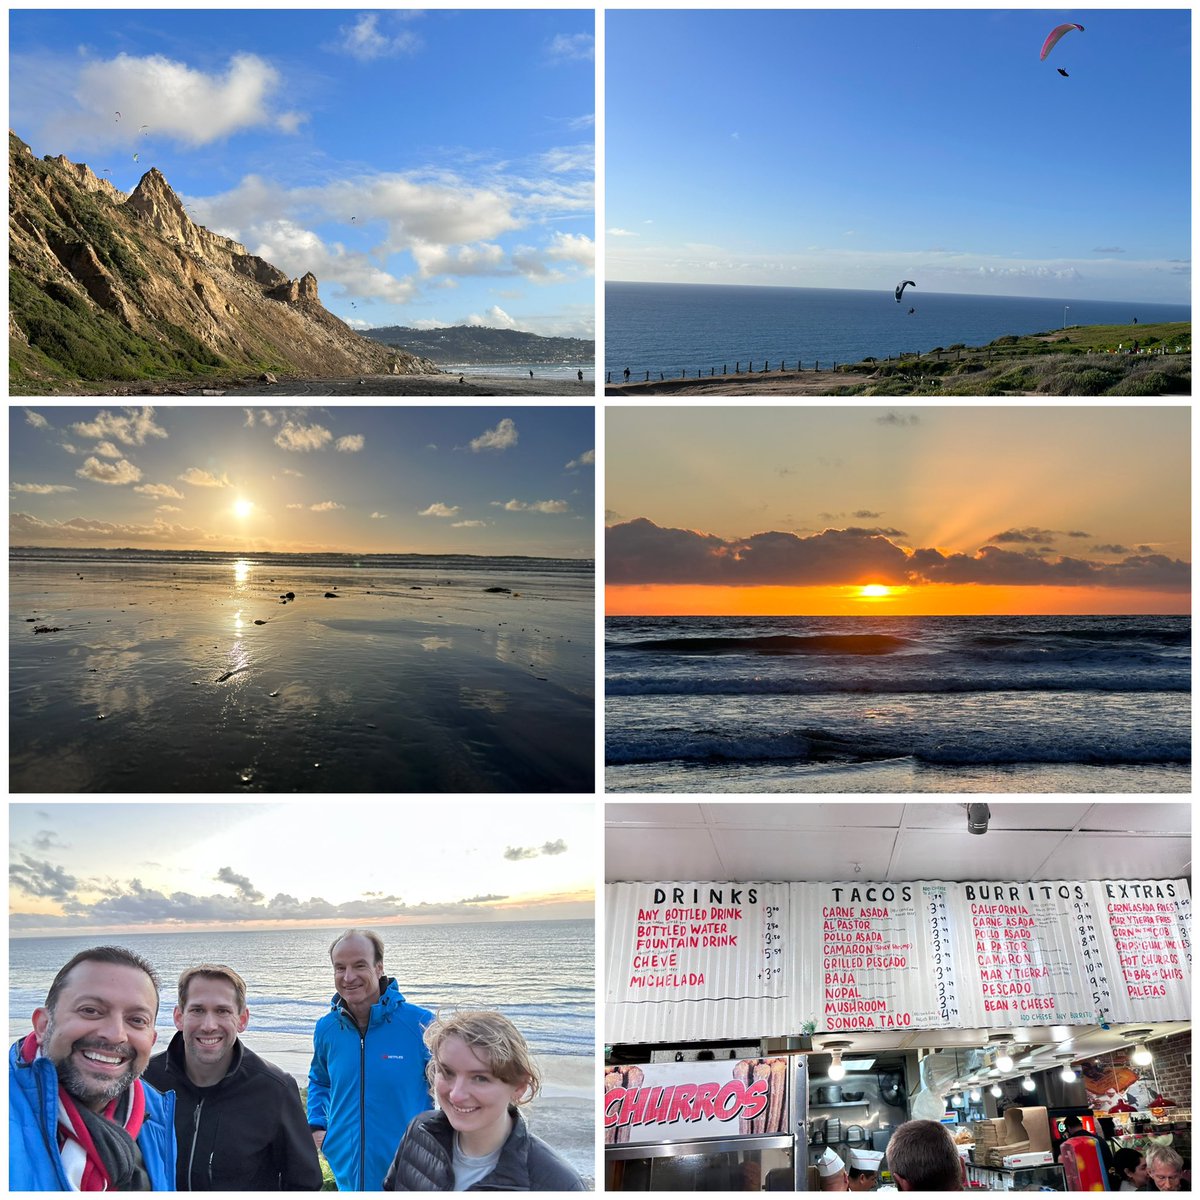 And that’s a wrap on @anabioscorp’s  #TRC23 with a sunset hike down to La Jolla shores beach from Torrey Pines Gliderport with Peter Zemljic, @mikehildebrand7, @AnnemarieDedek, and @RichardKondo1 and ending with awesome tacos @letstaco_ #TheTacoStand 🌮 in La Jolla